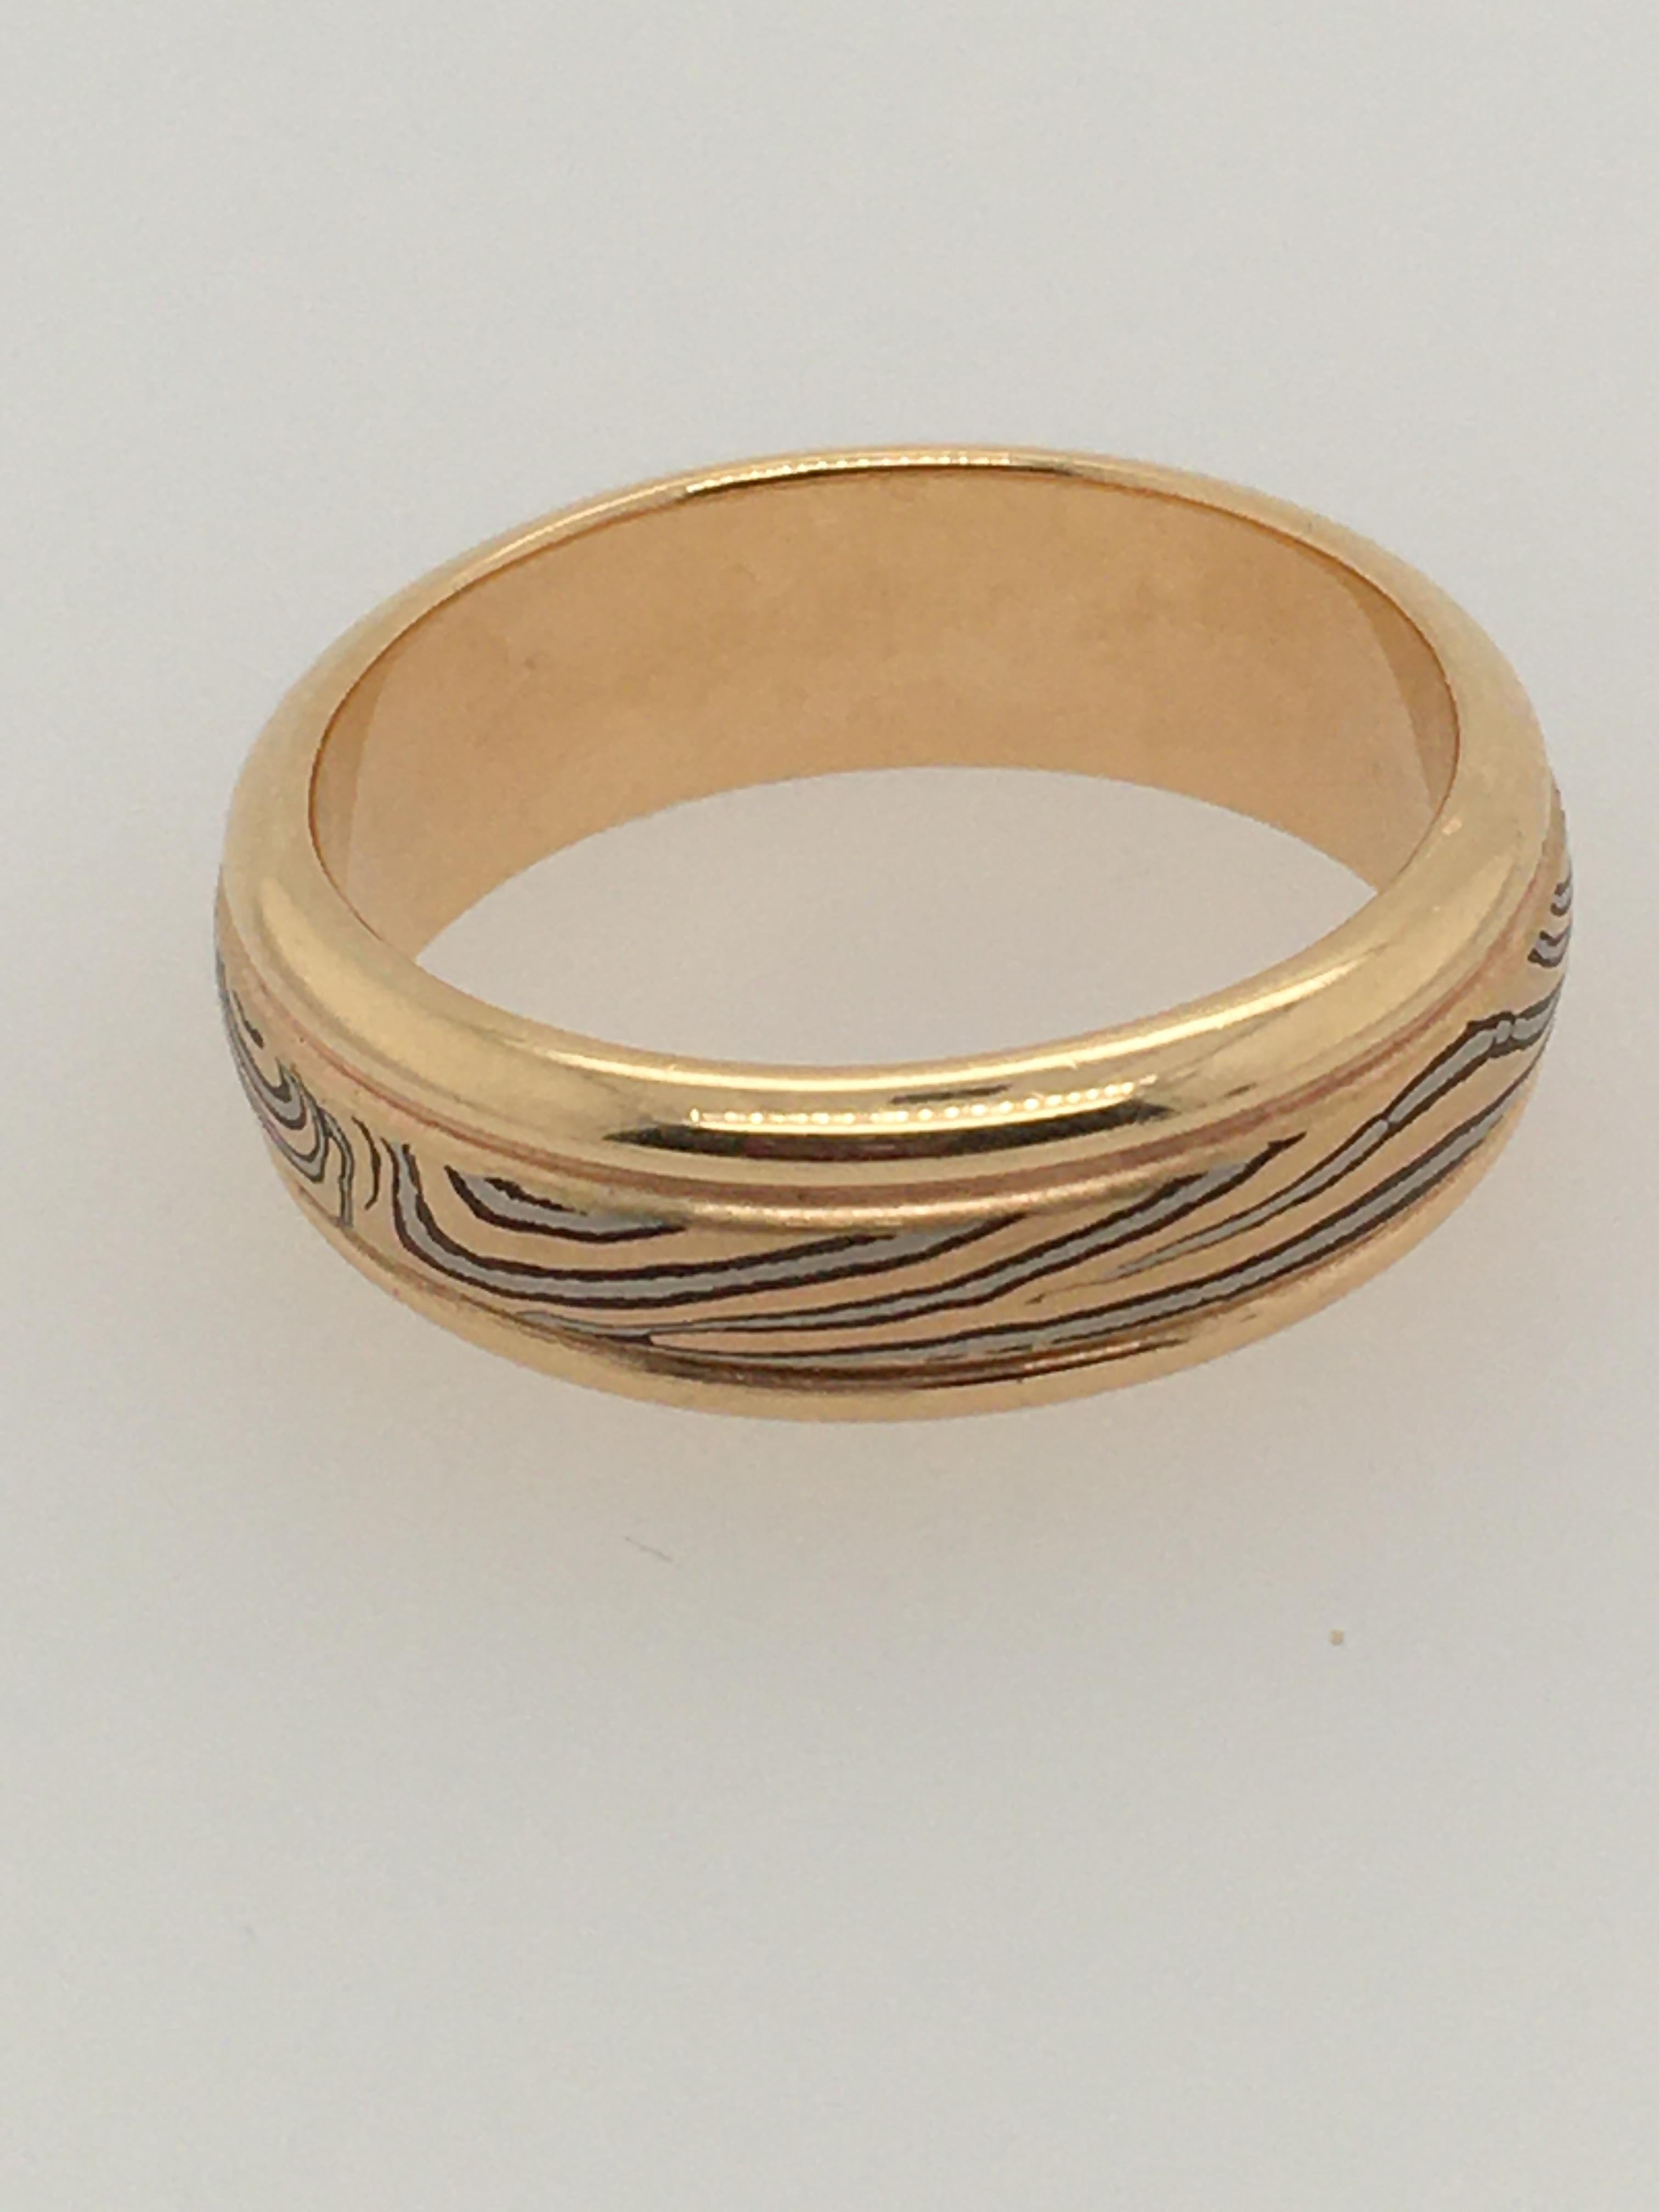 A striking handcrafted 7 mm Mokume round edge band by George Sawyer.  The band features a distinctive design of 14K gold edges surrounding rose and gray gold.  Style Number is RE7YB.  Interior stamp reads 